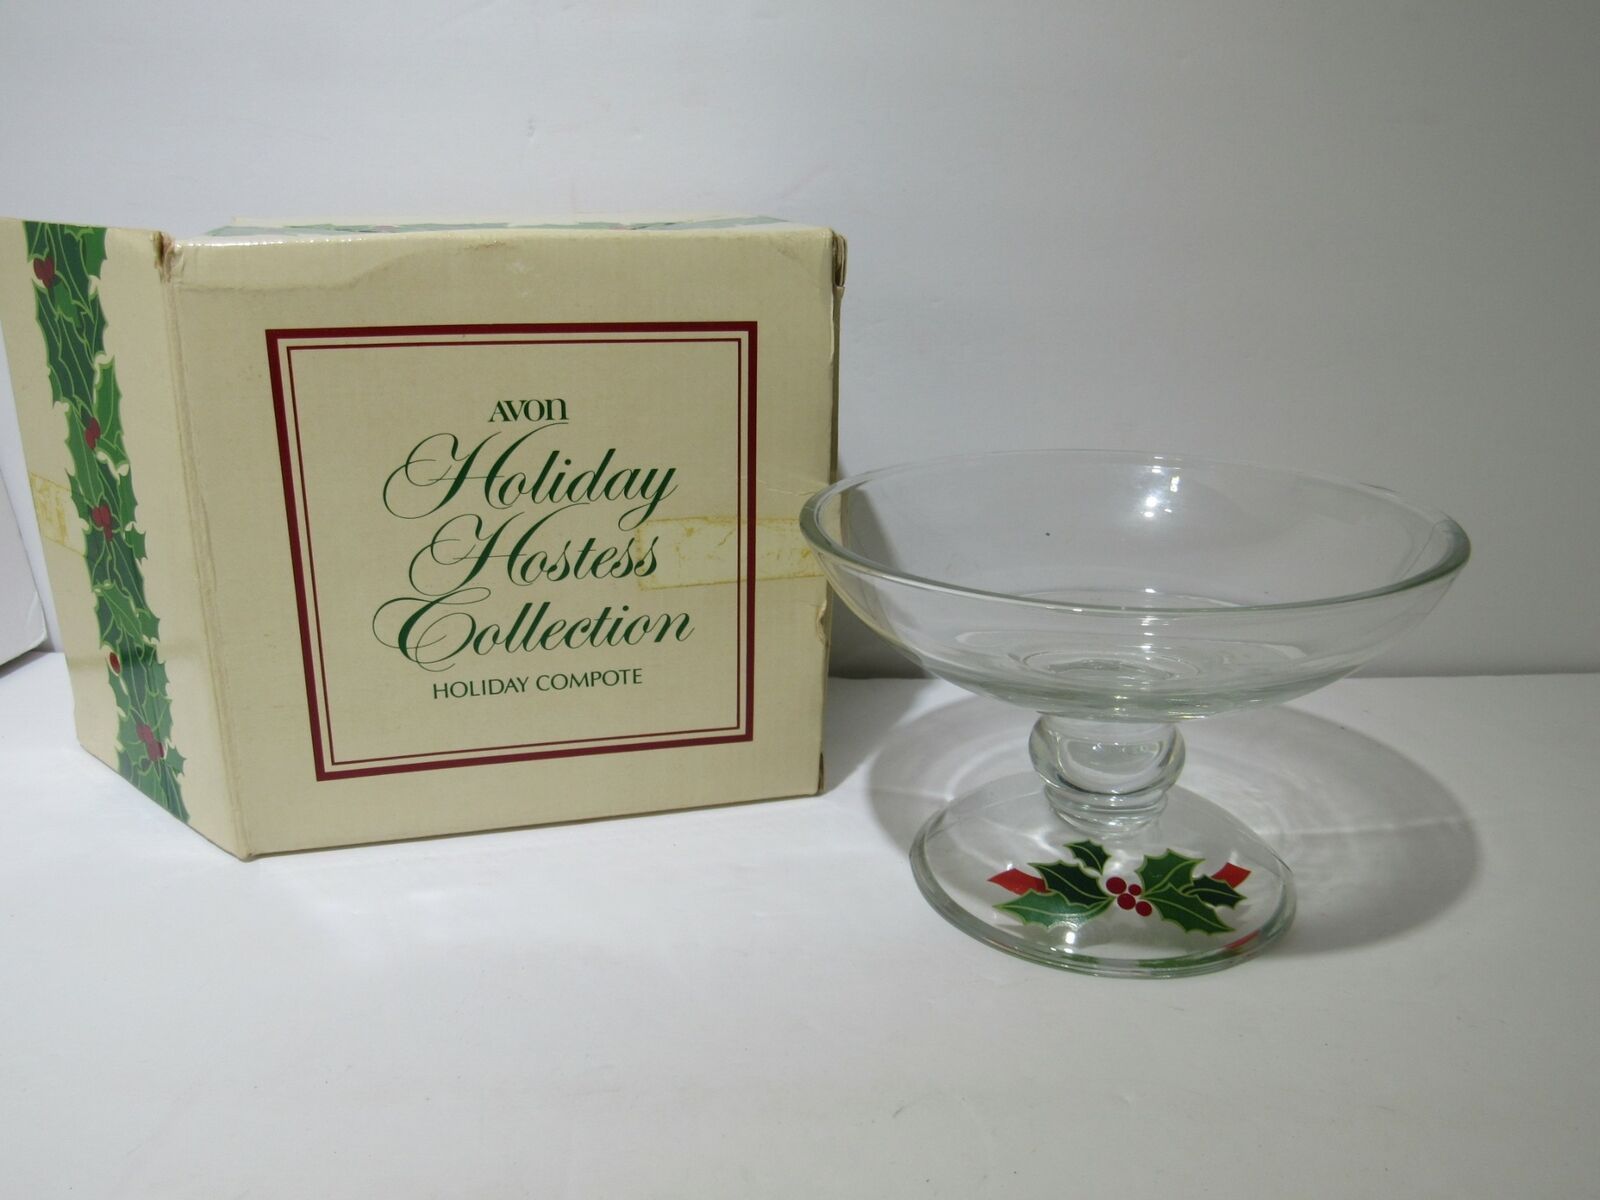 Avon Holiday Hostess Collection Holiday Compote NIB - $14.25